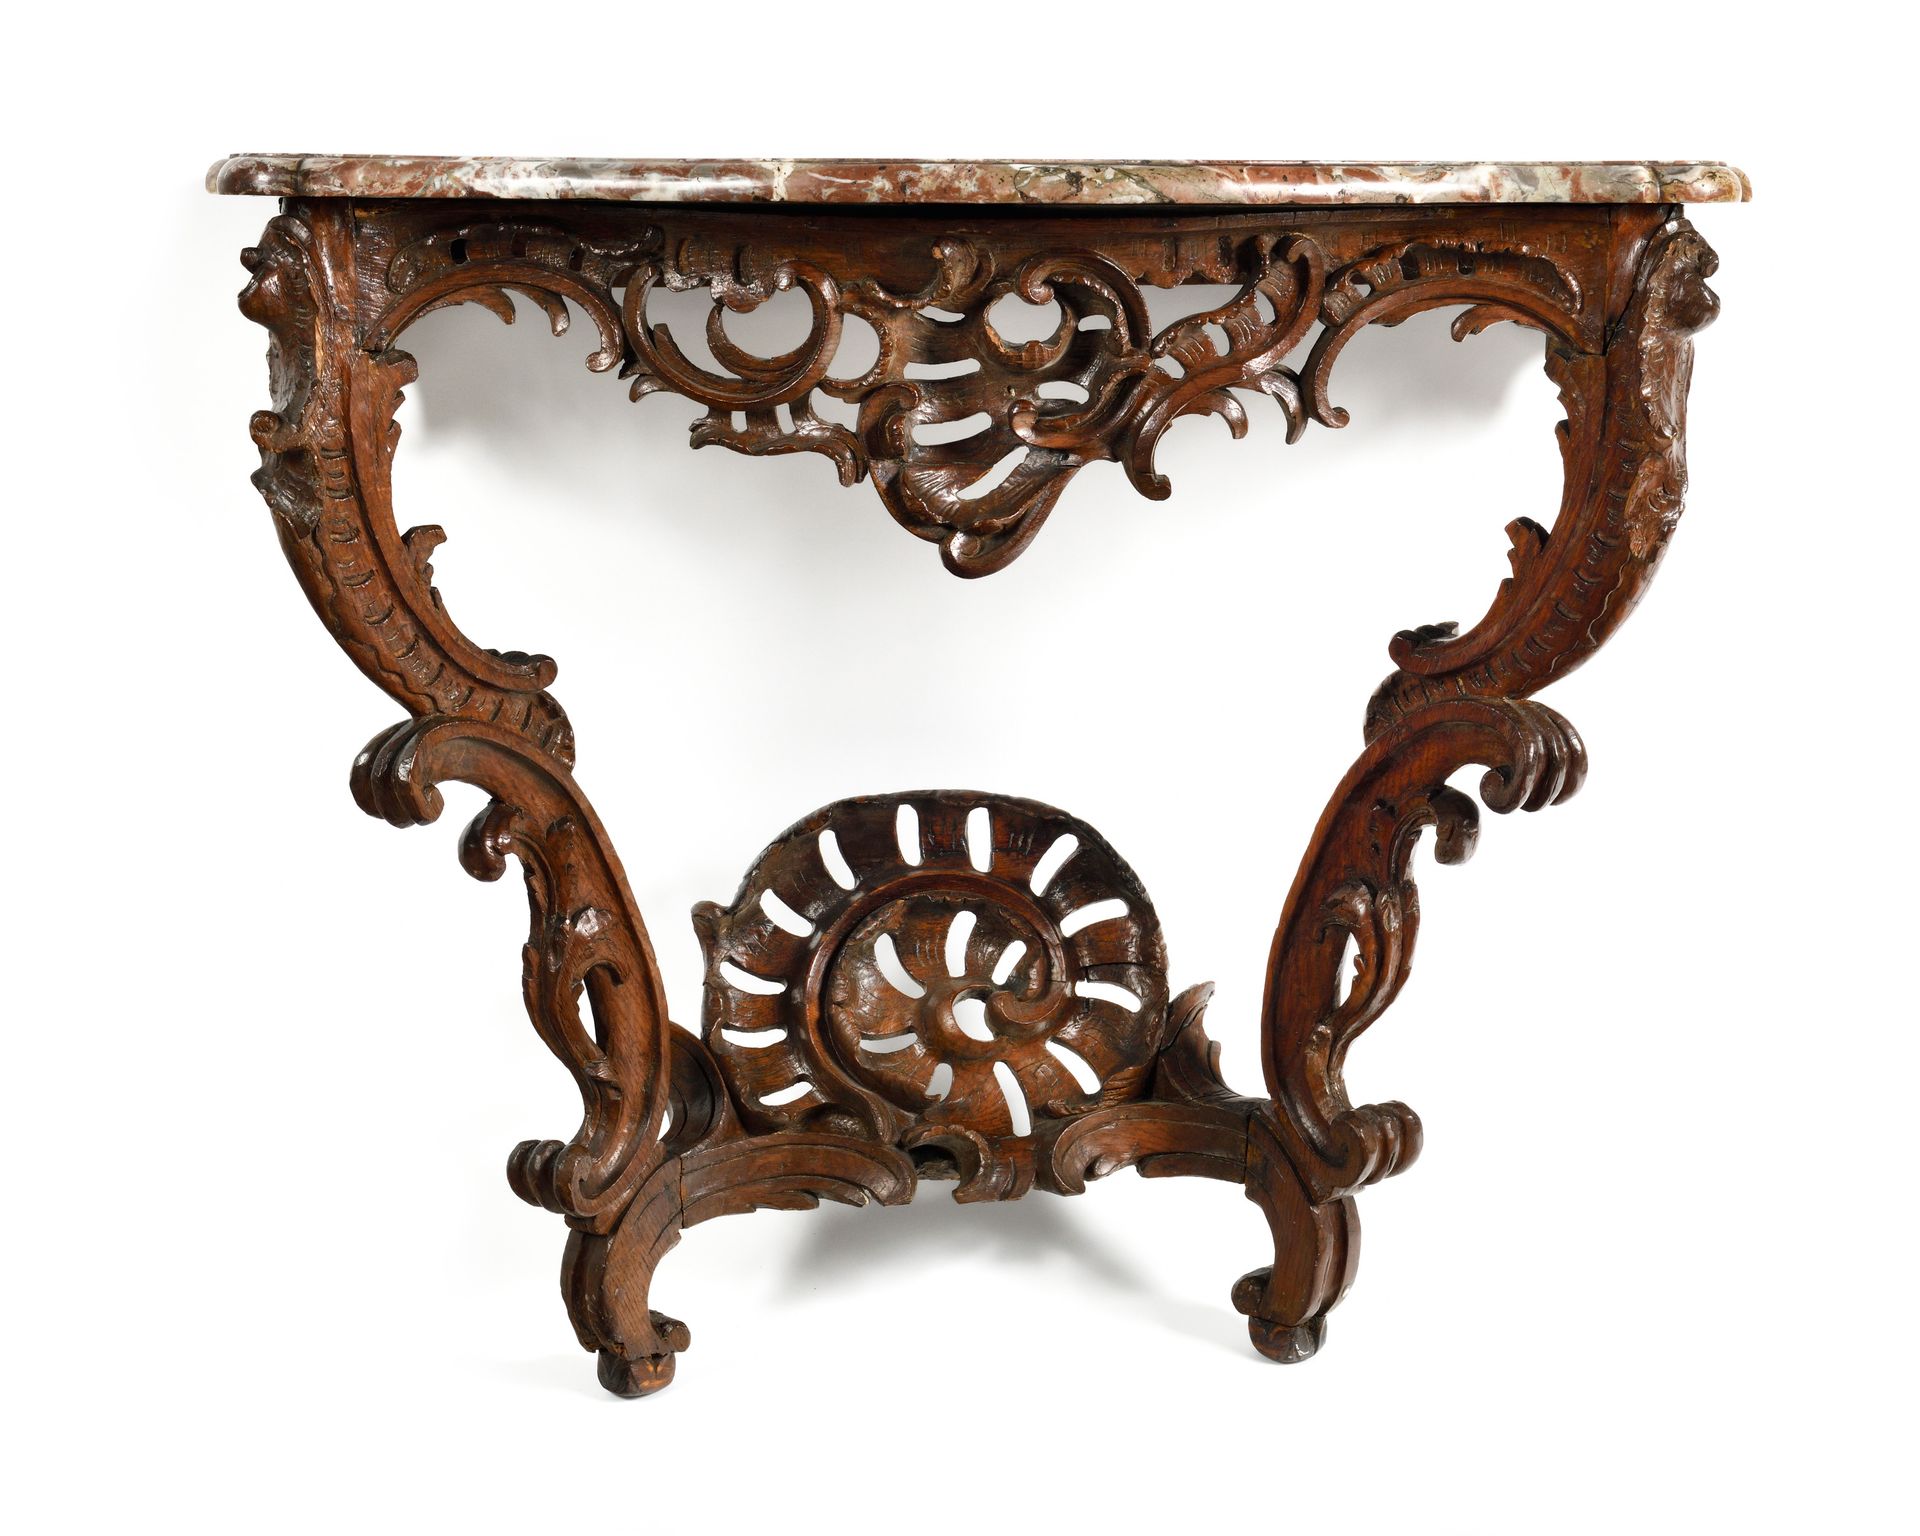 Null GALBEE CONSOLE
in molded and carved wood, decorated with openwork foliage a&hellip;